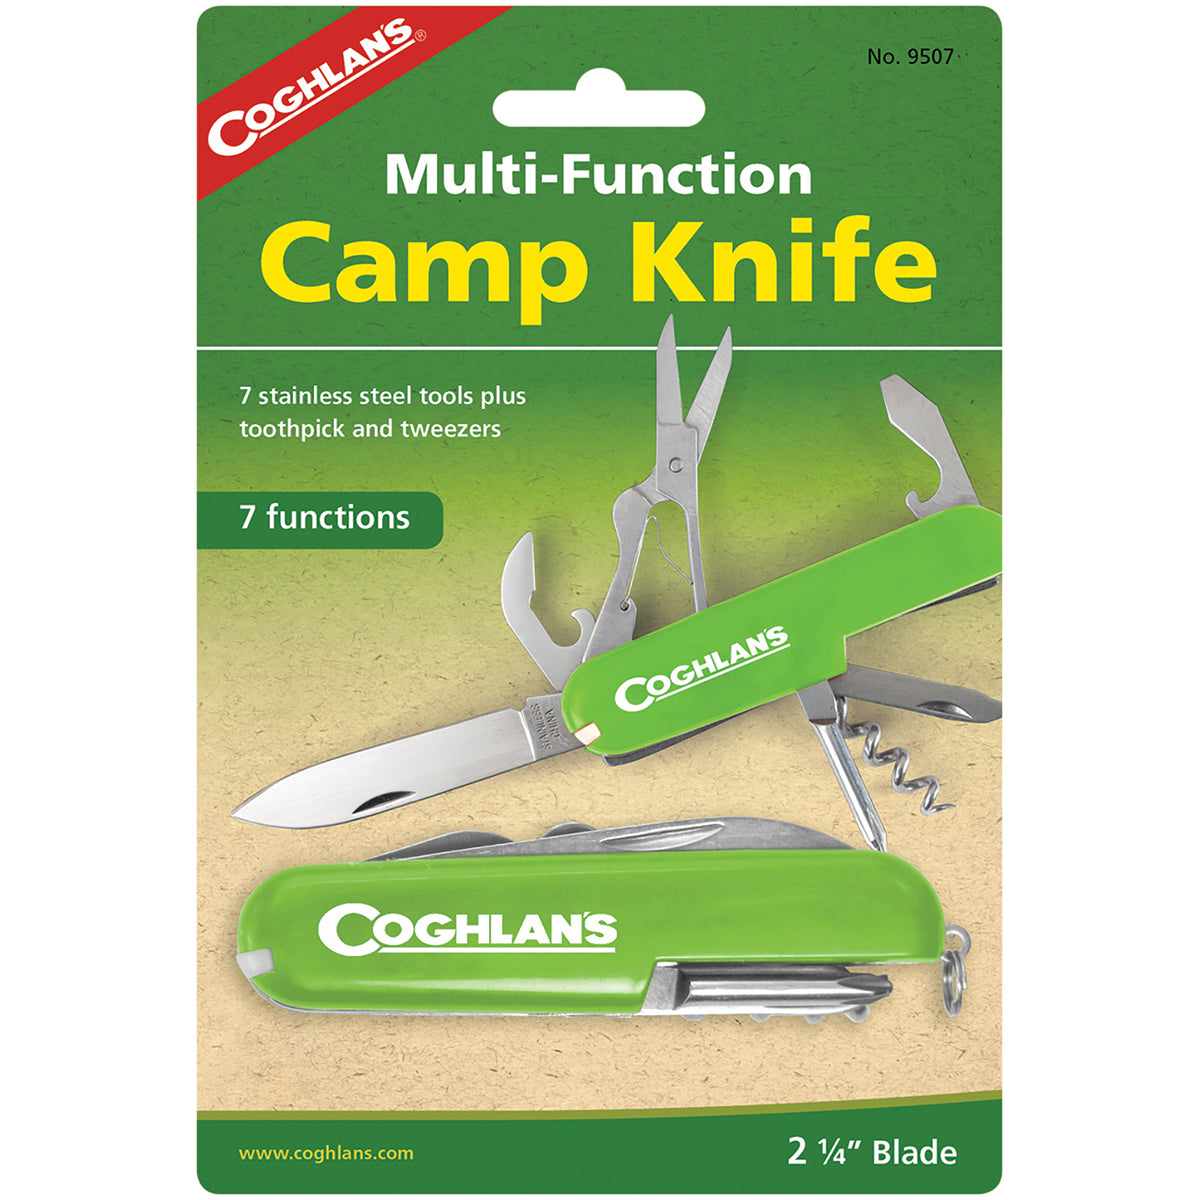 Coghlan's Multi-Function Camp Knife, 7 Functions, Army Camping Swiss Style Coghlan's